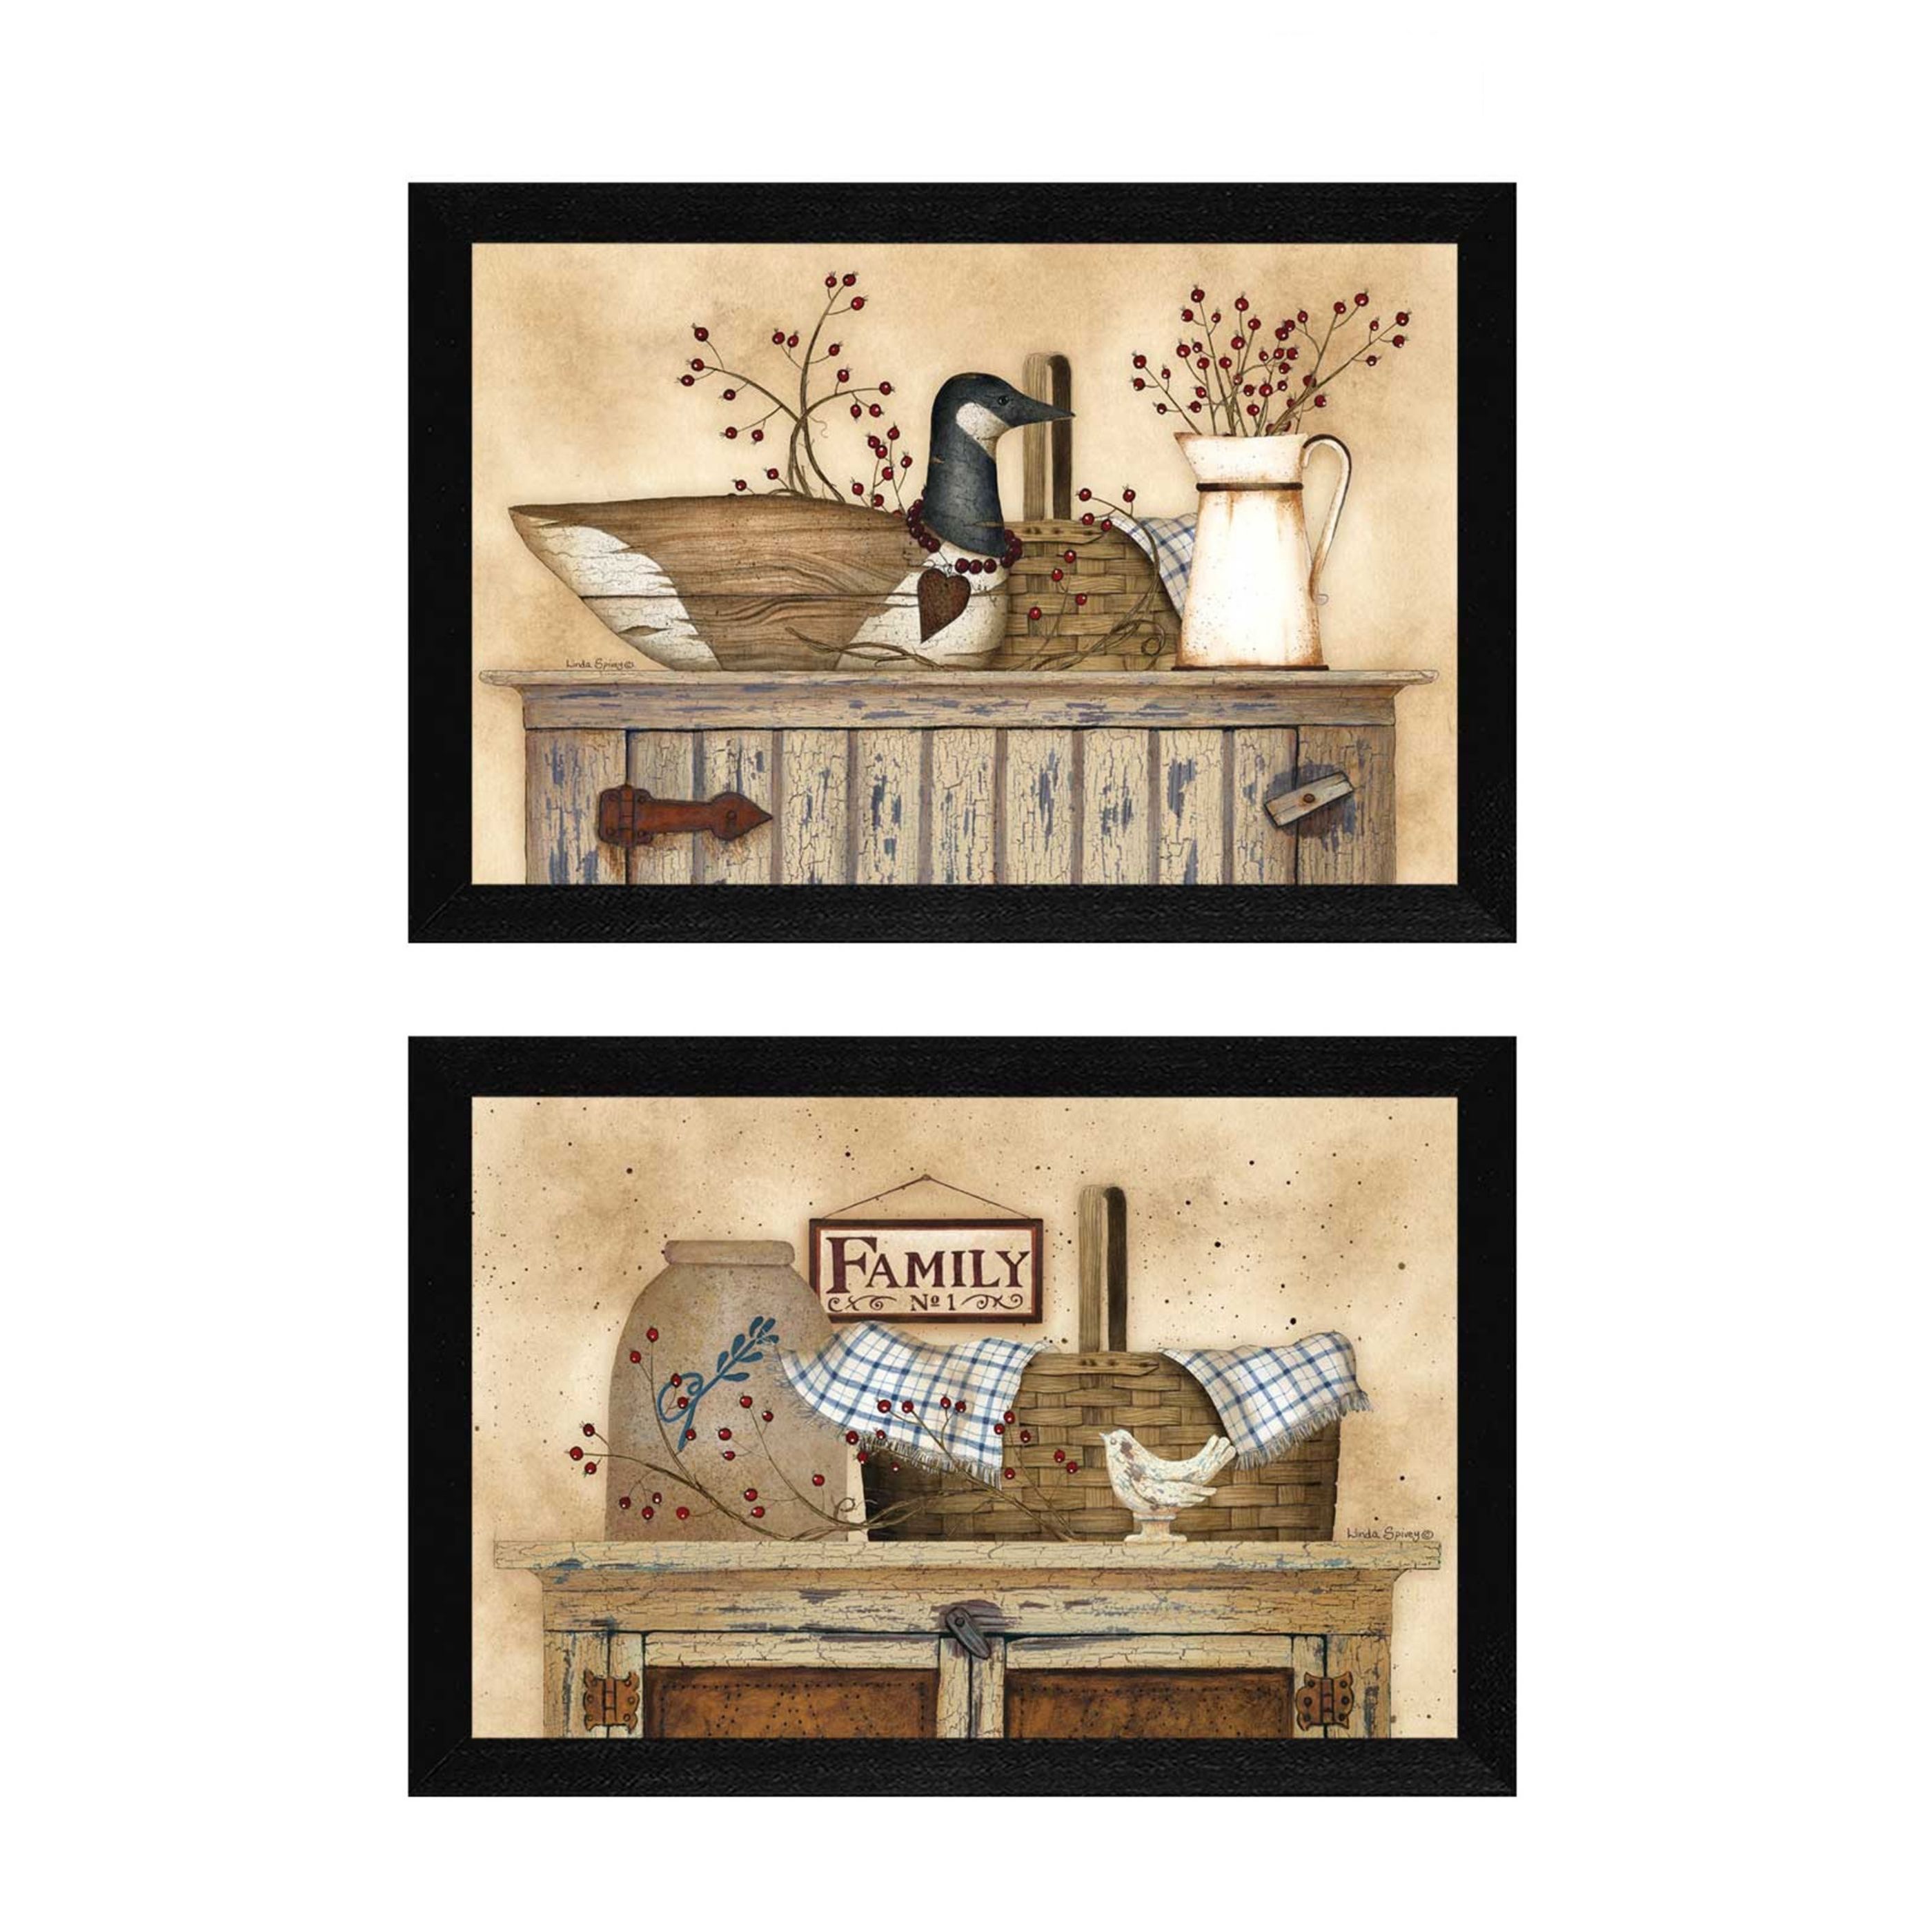 "Rustic Still Life Collection" 2-Piece Vignette By Linda Spivey, Printed Wall Art, Ready To Hang Framed Poster, Black Frame